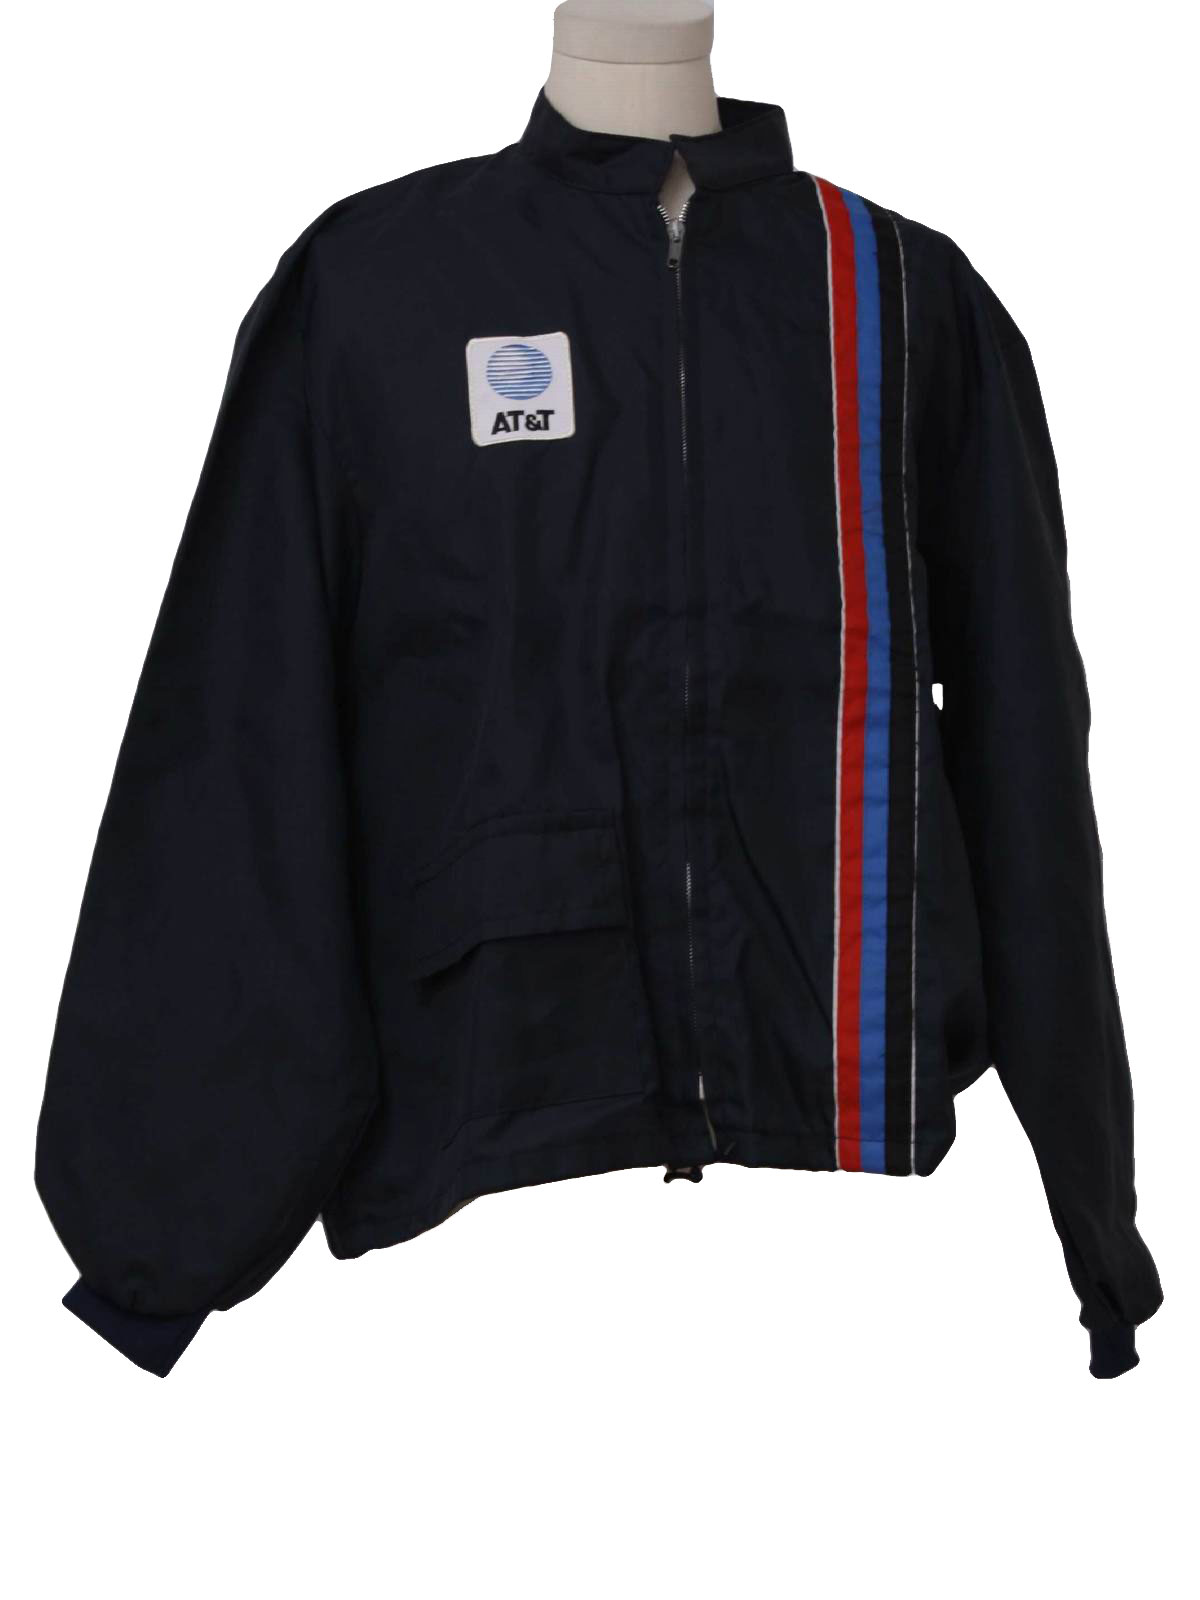 1970's Retro Jacket: 70s -The Great Lakes Jacket- Mens blue-black, red ...